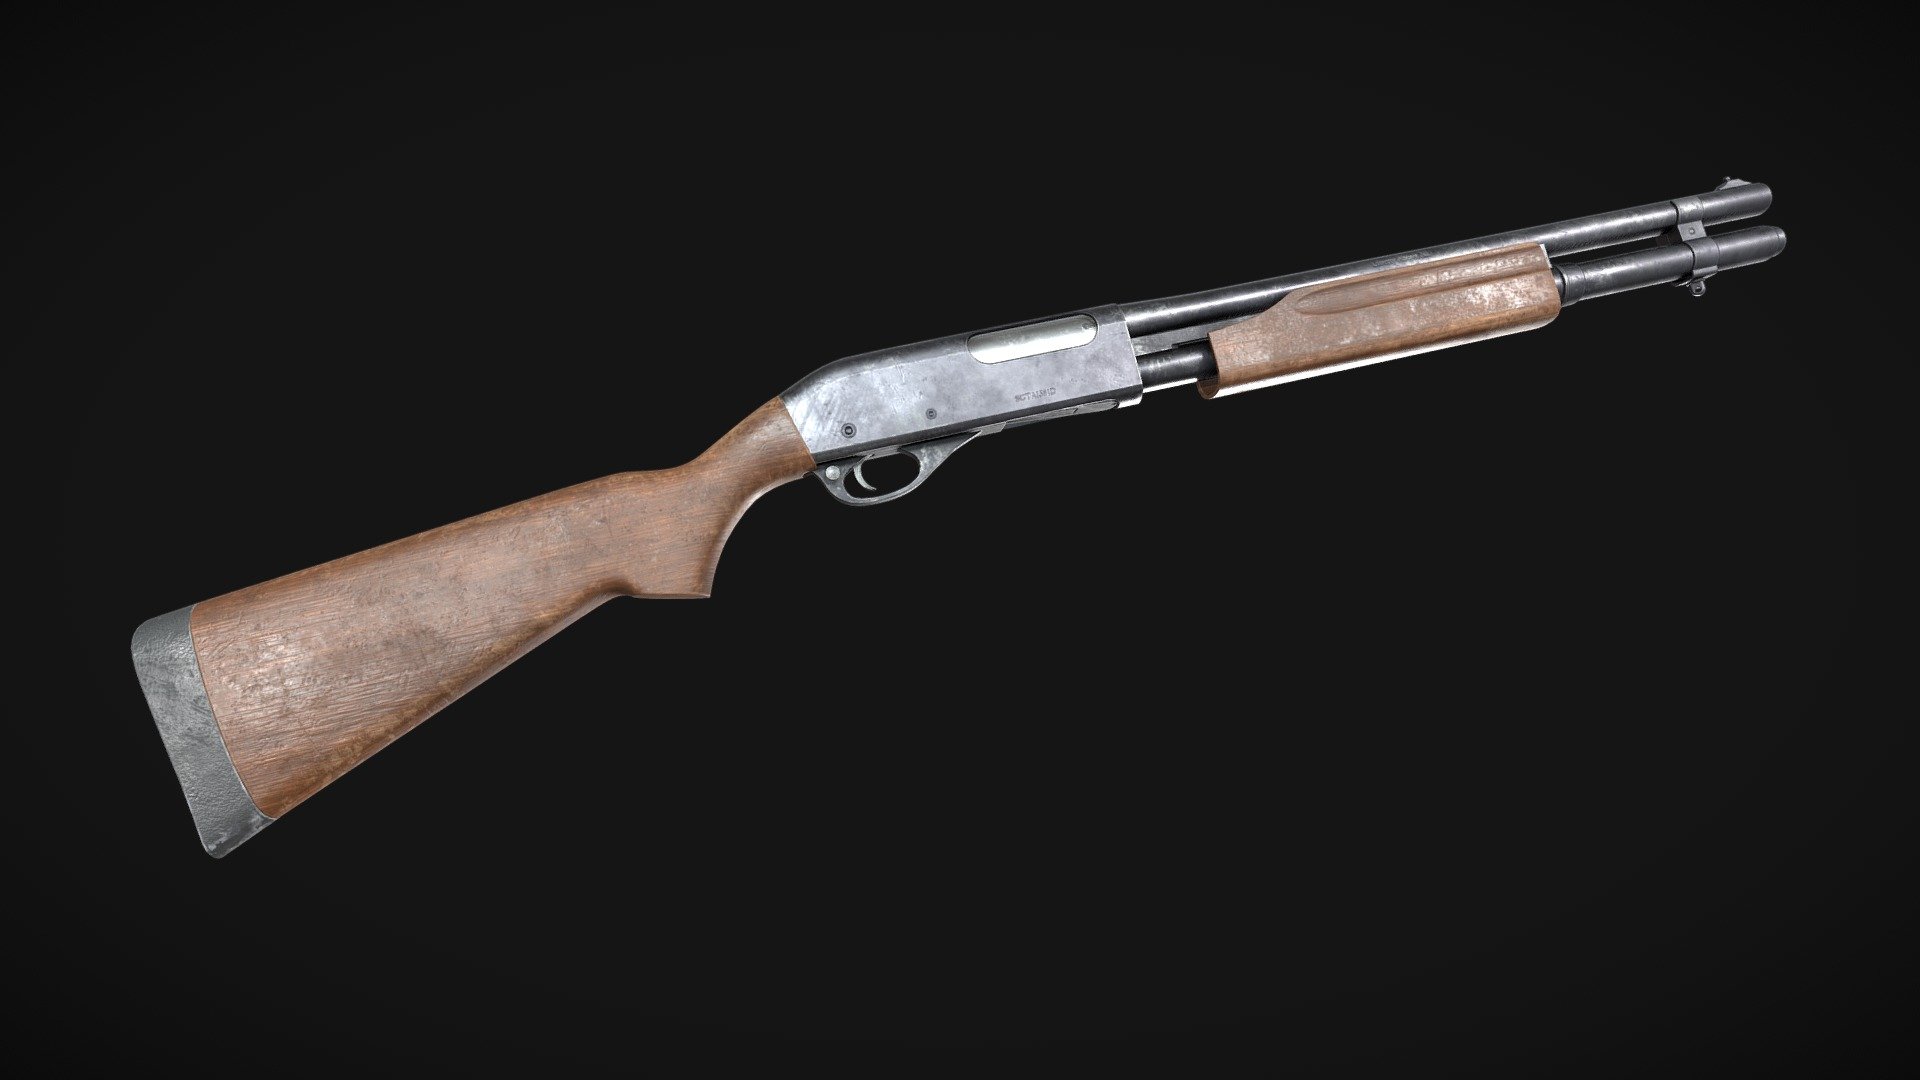 A shotgun made during my free time.
The model is made in 3ds max and textured in substance painter 3d model